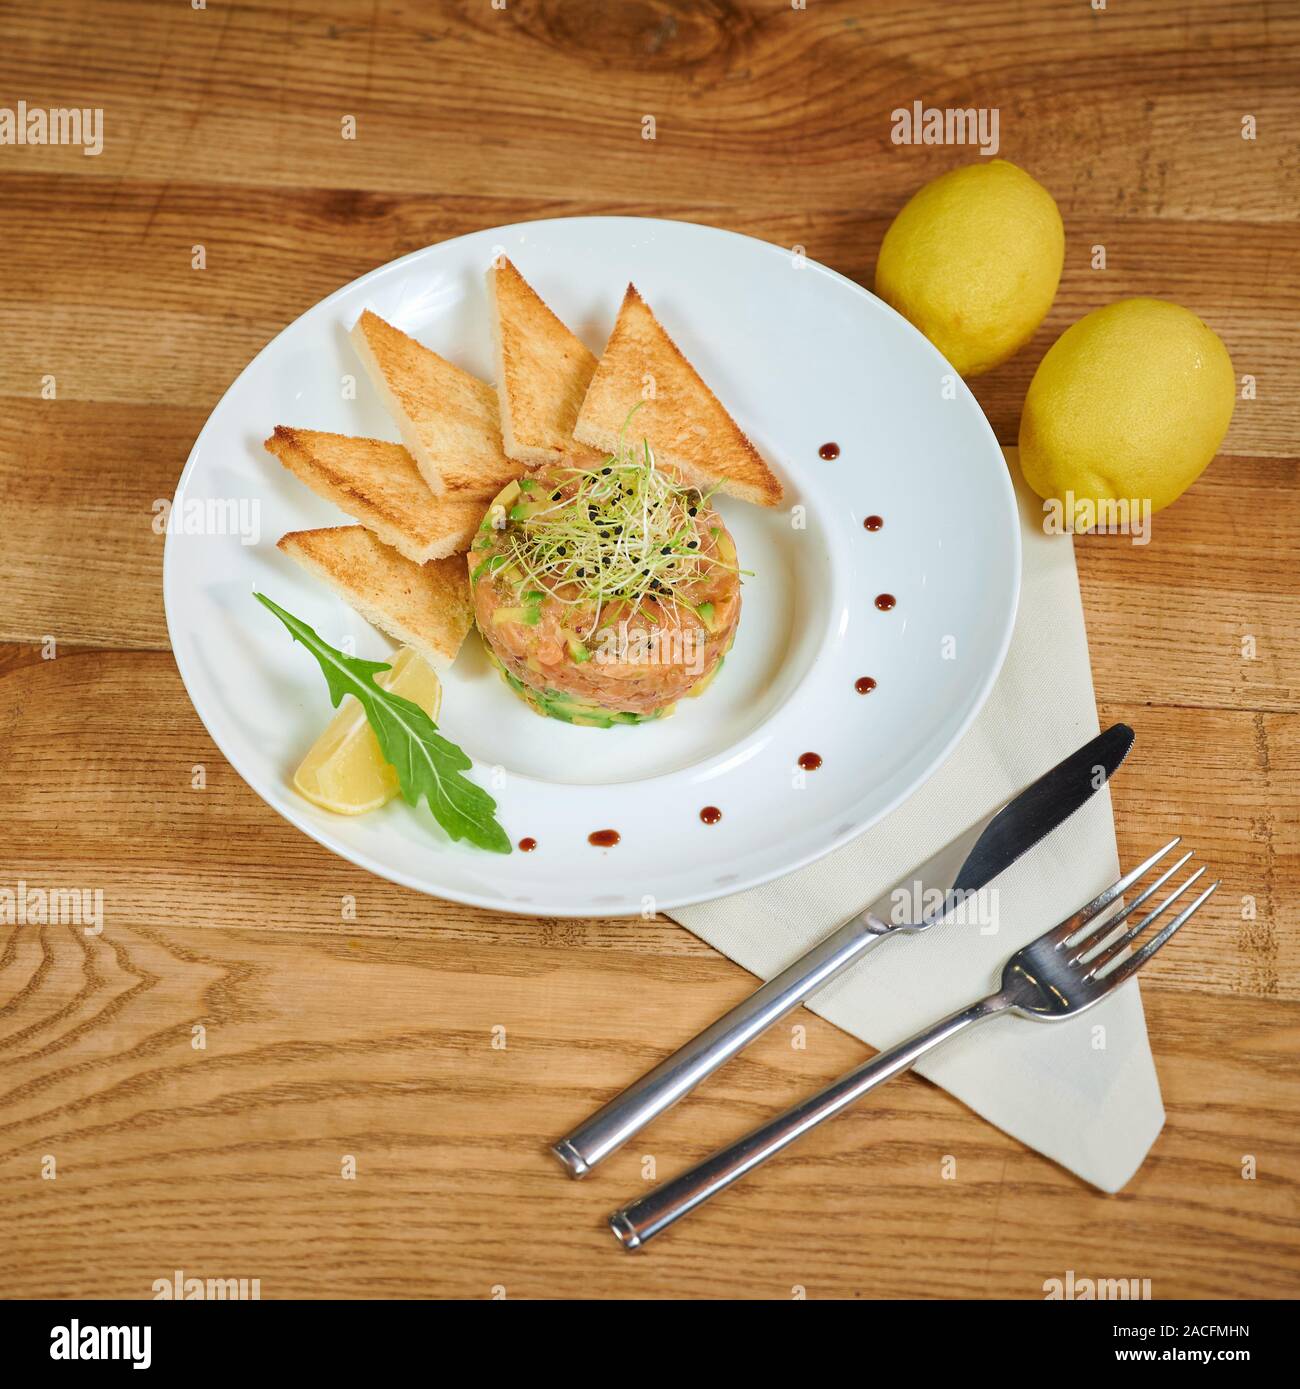 Delicious salmon tartare with avocado. Arrangement with a glass of wine and cutlery Stock Photo